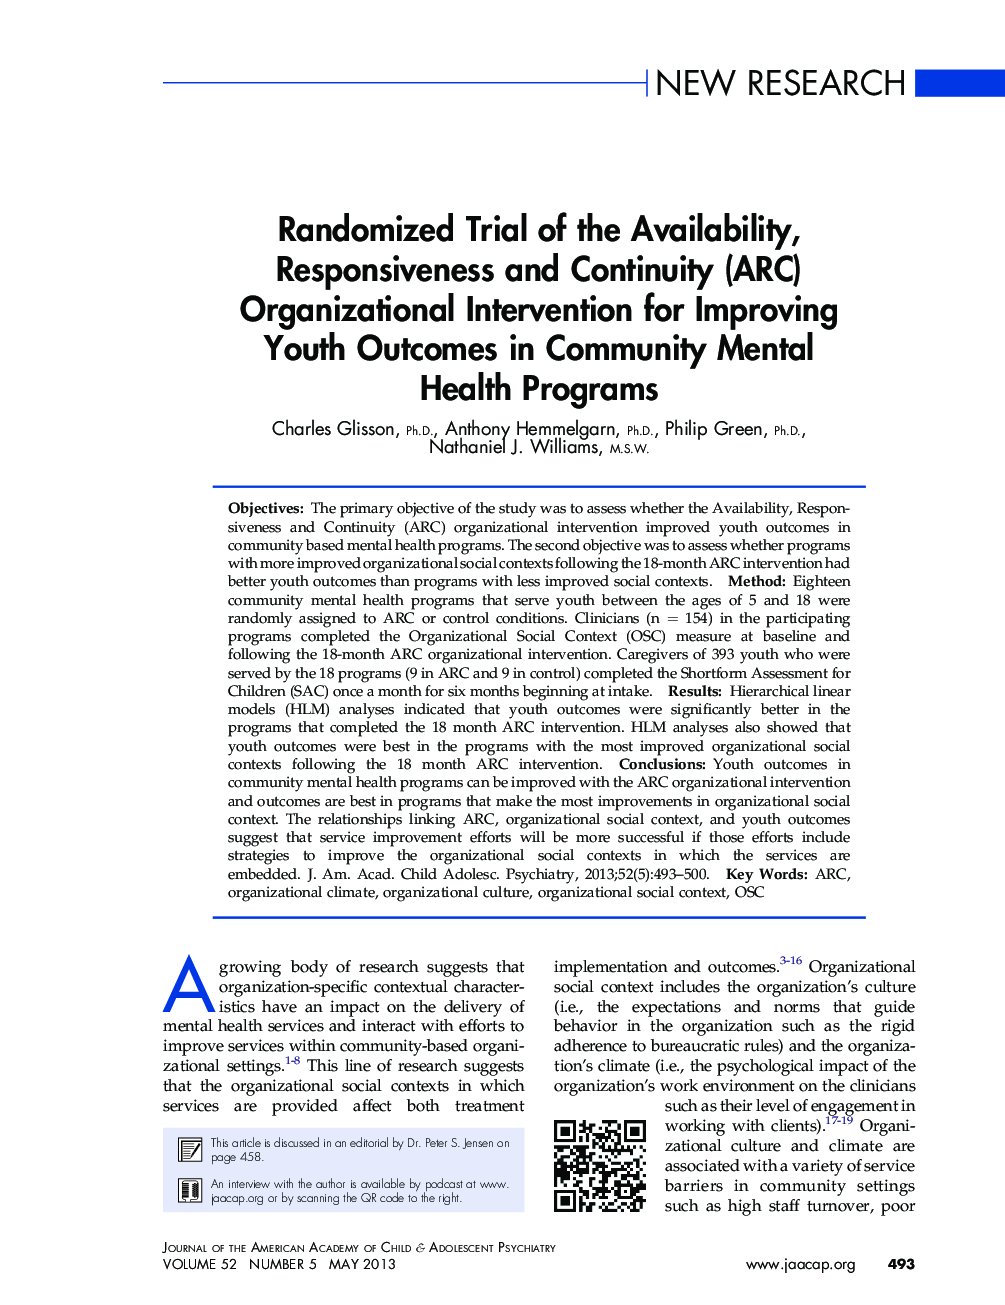 Randomized Trial of the Availability, Responsiveness and Continuity (ARC) Organizational Intervention for Improving Youth Outcomes in Community Mental Health Programs